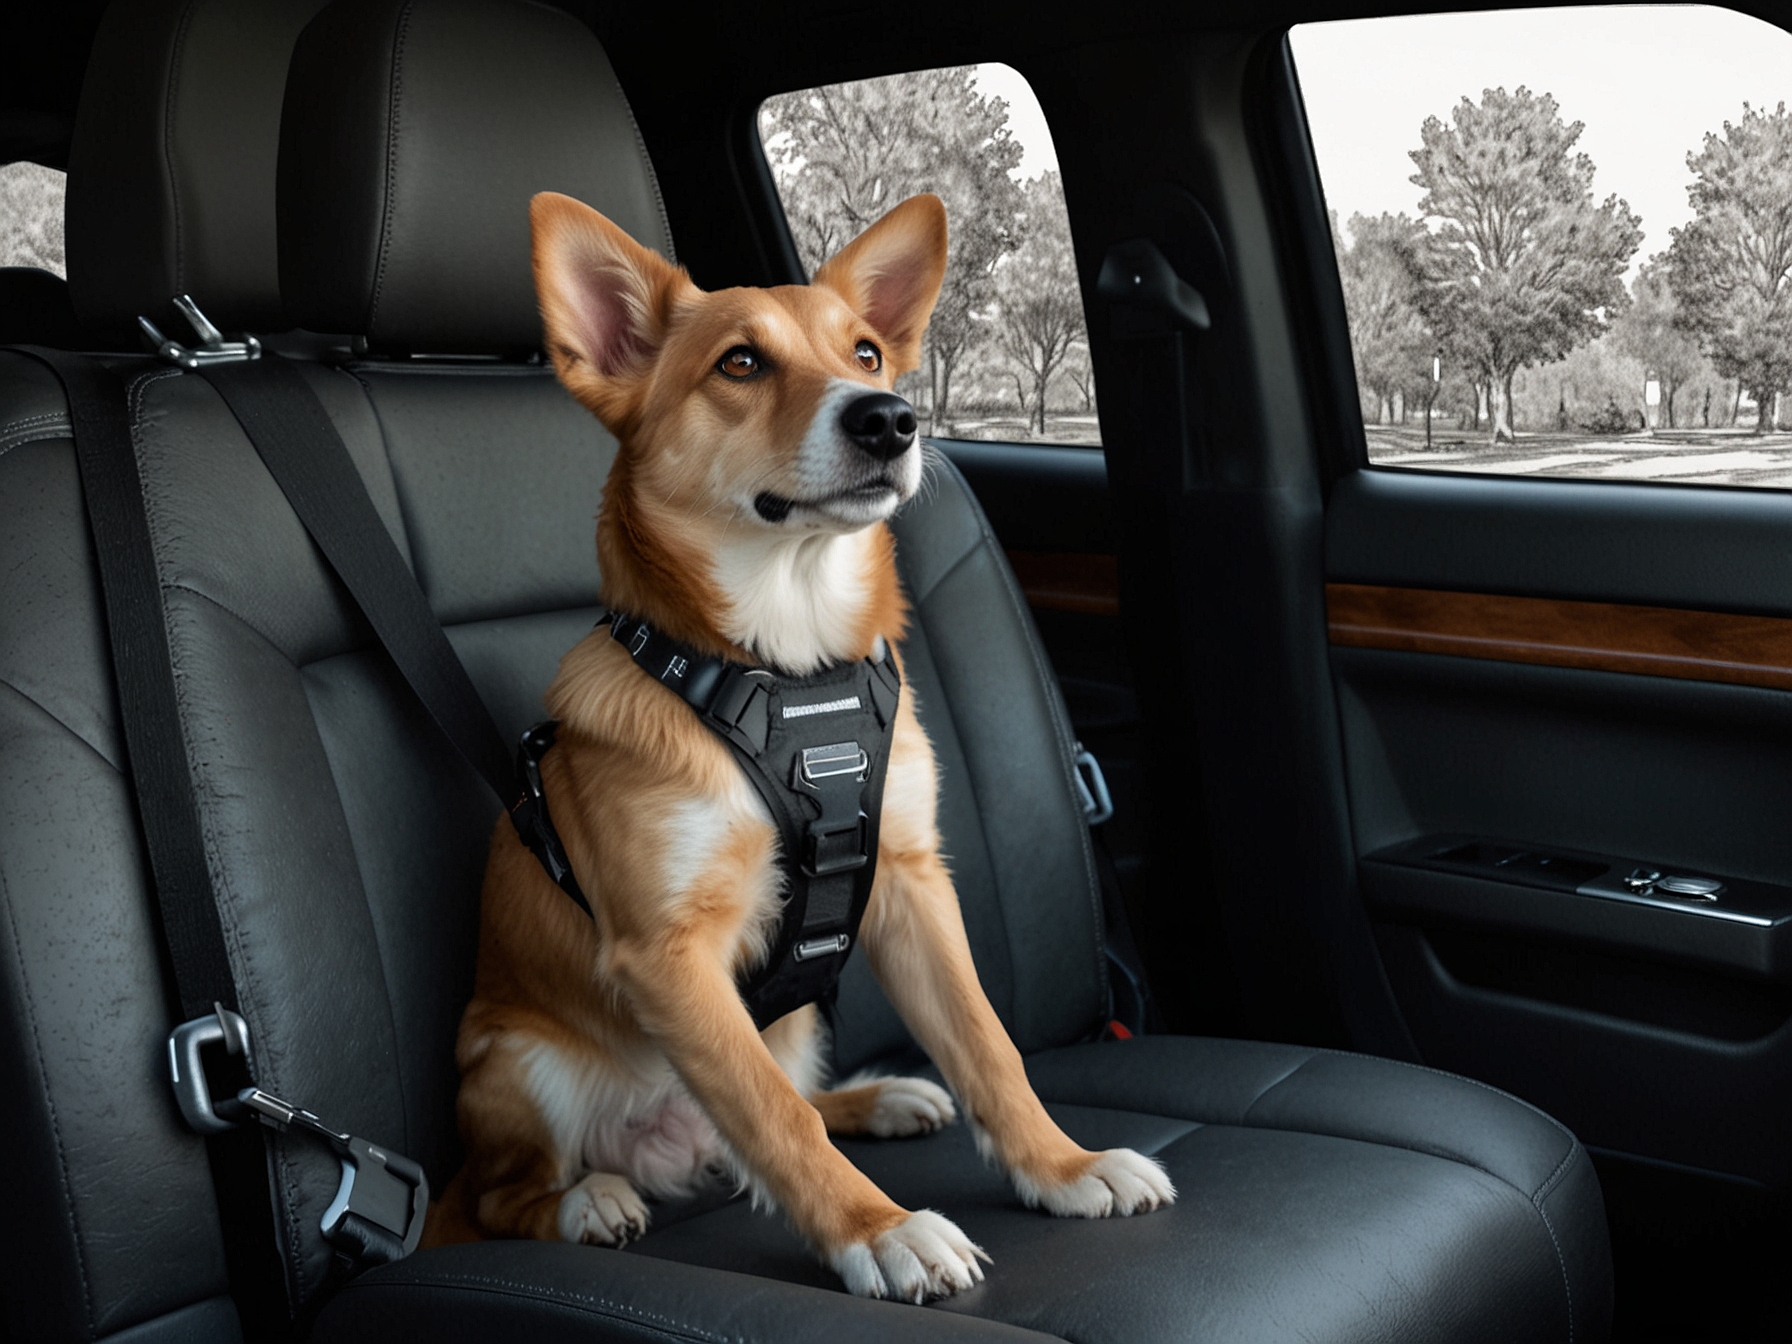 A driver ensuring their dog is securely restrained in the back seat using a harness attached to the car's seatbelt system, as recommended for safe travel.